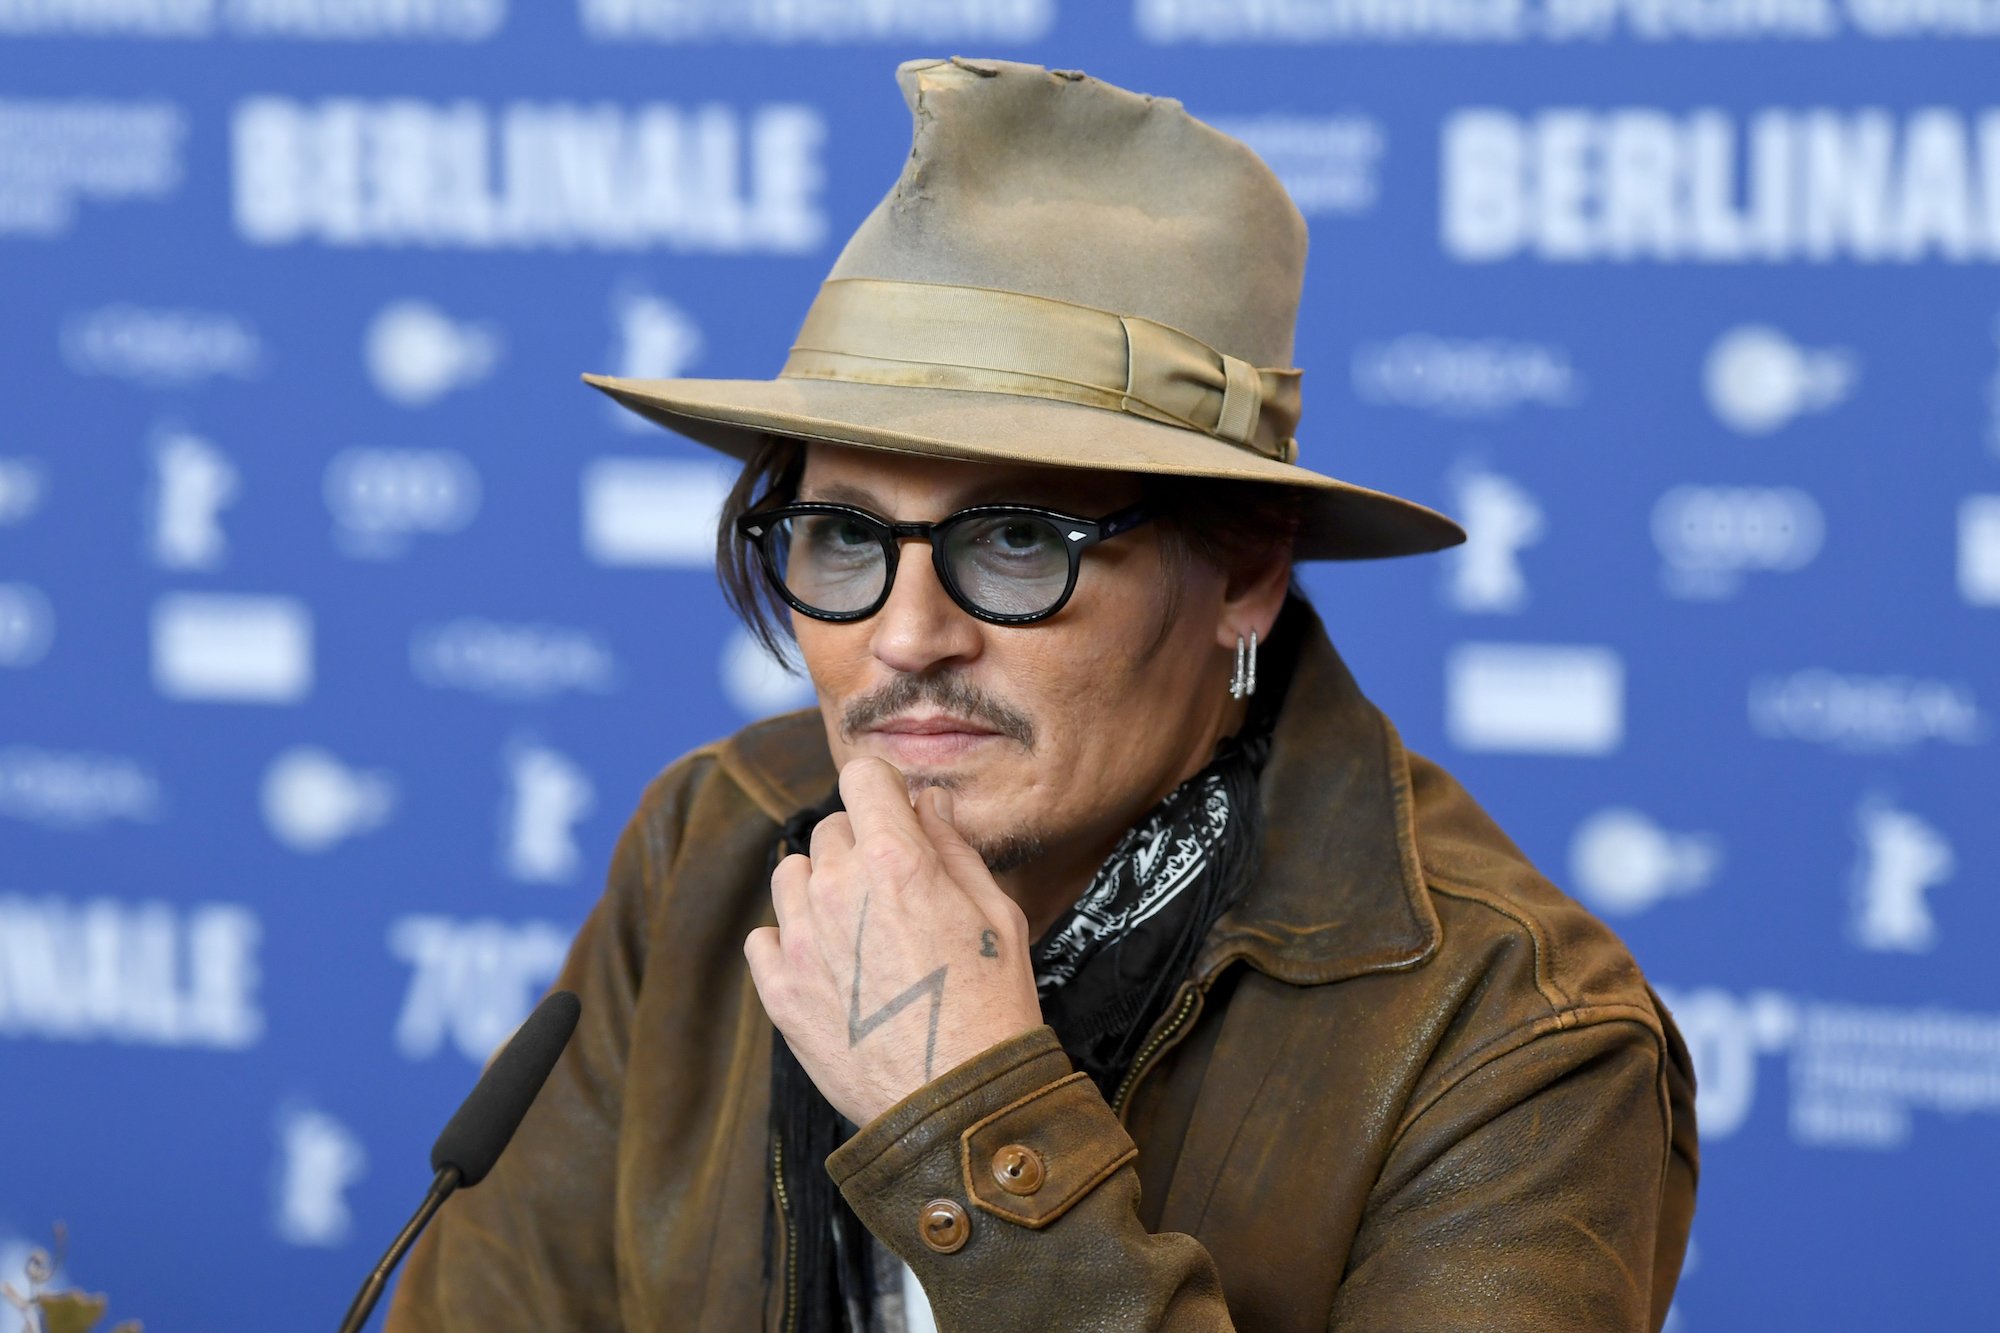 Johnny Depp in a hat and glasses in front of a blurred blue background